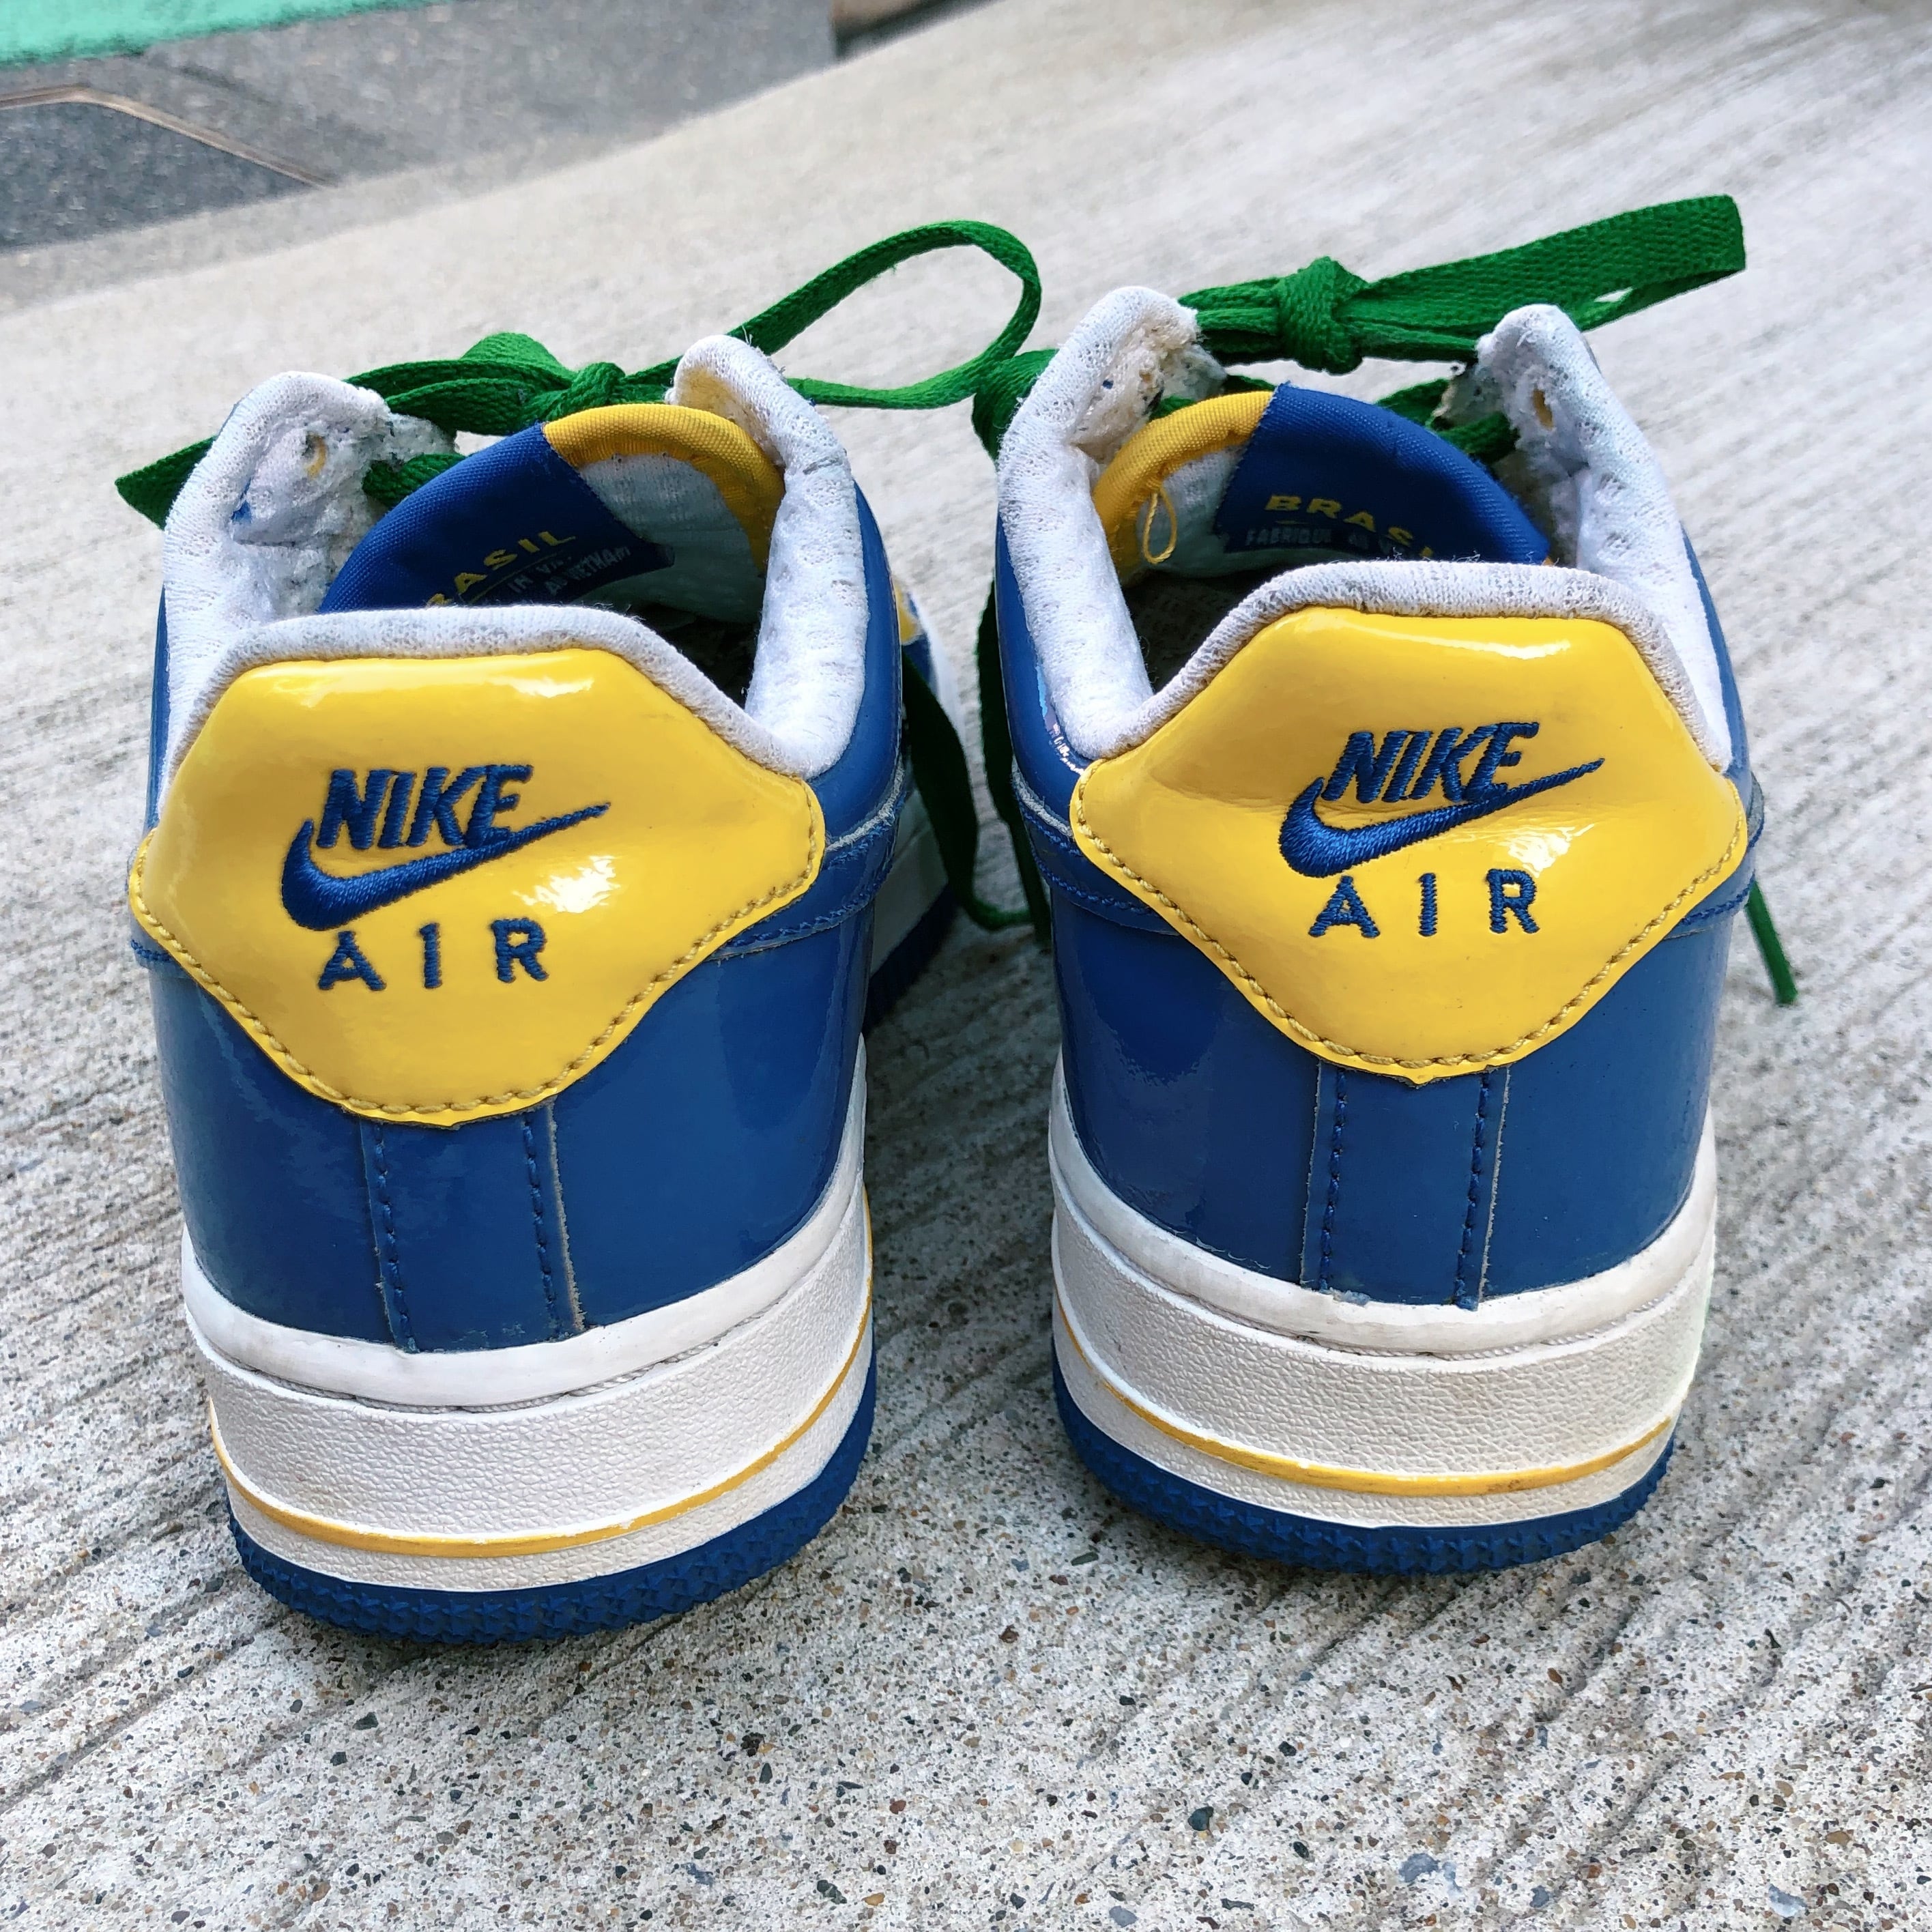 used】ナイキ エアフォースワン Nike AIR FORCE 1 AF1 | FBT SHOP STORE